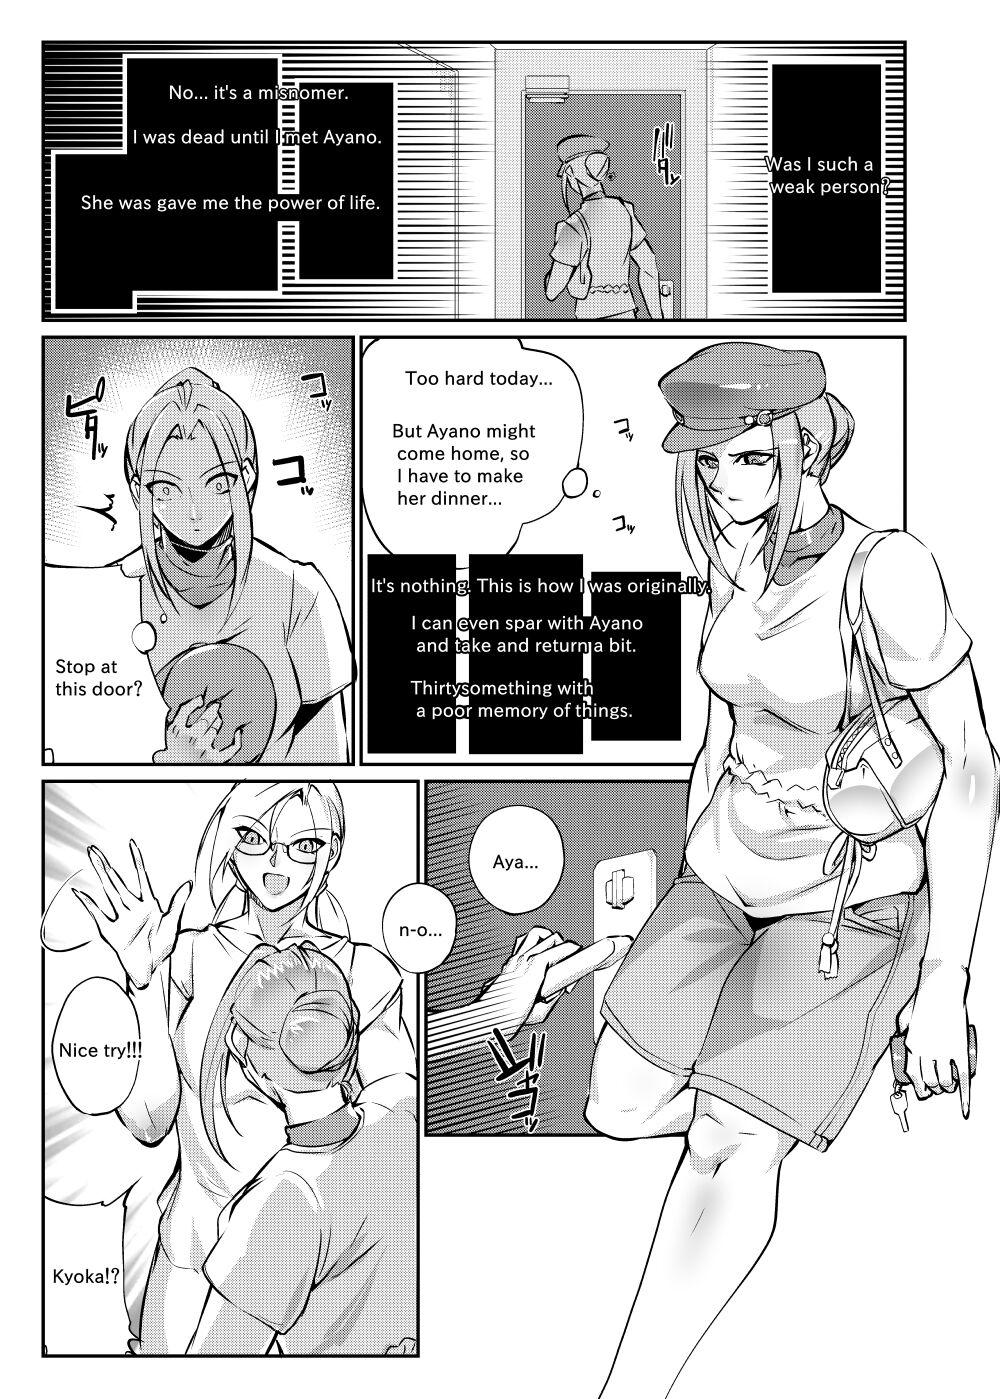 Old Vs Young Tougijou Rin - Arena Rin 5 - Original Dirty Talk - Page 10